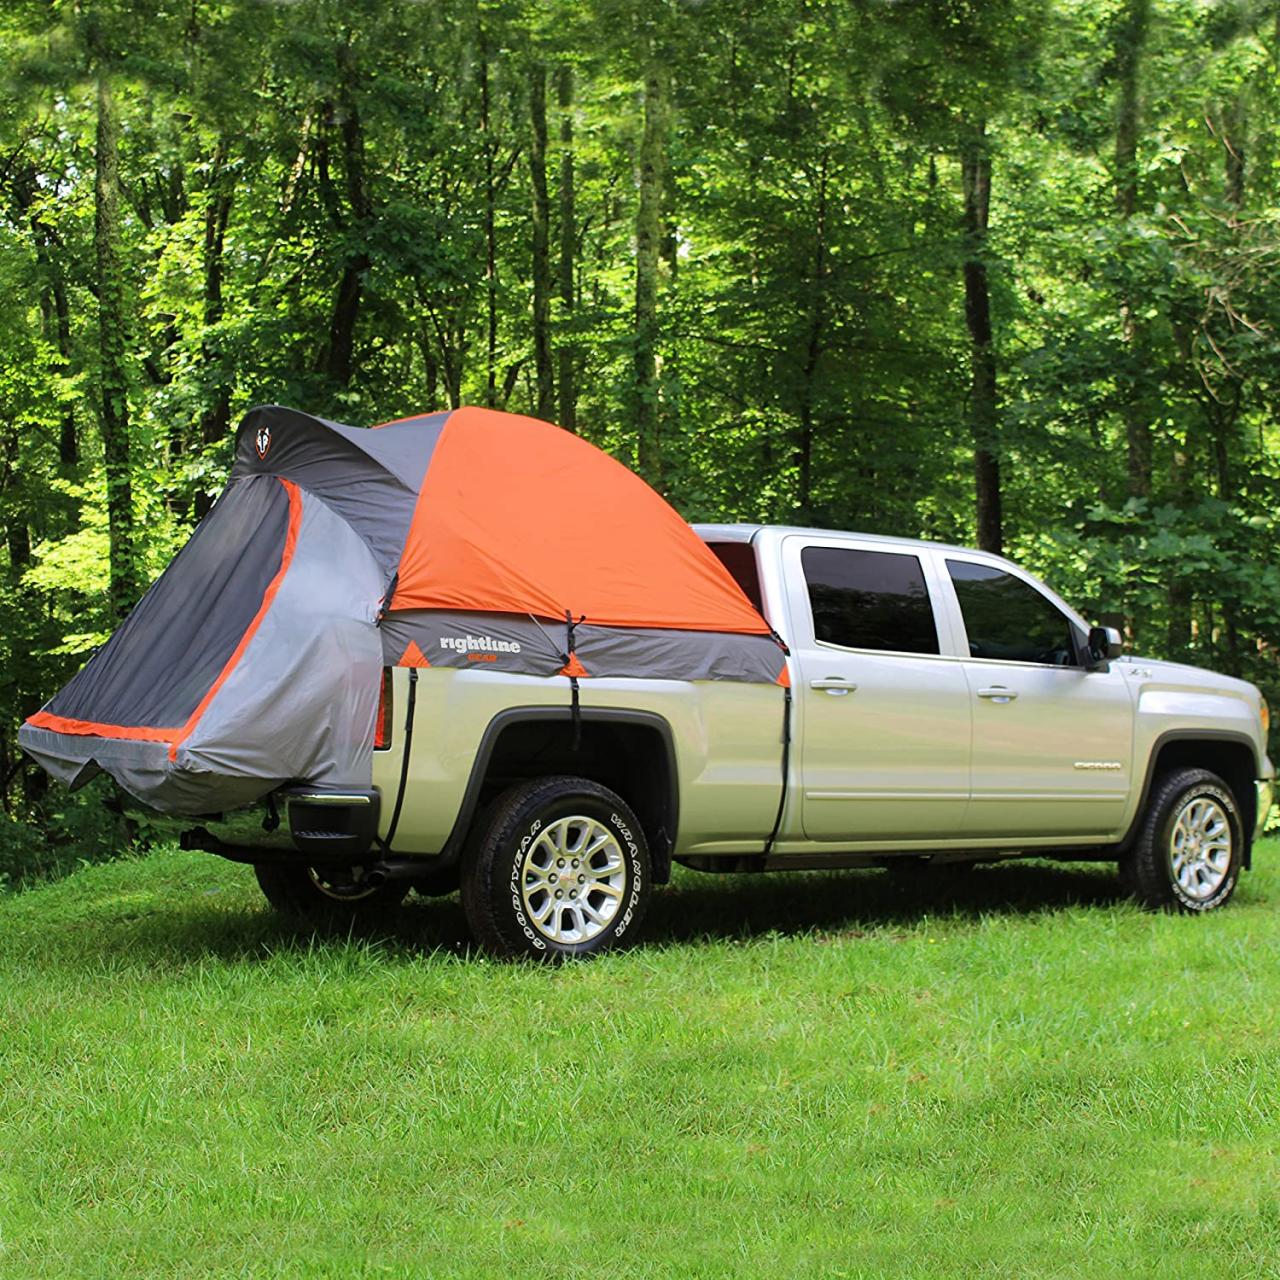 Automotive Exterior Accessories woodfieldsystems.com Rightline Gear Truck  Tents